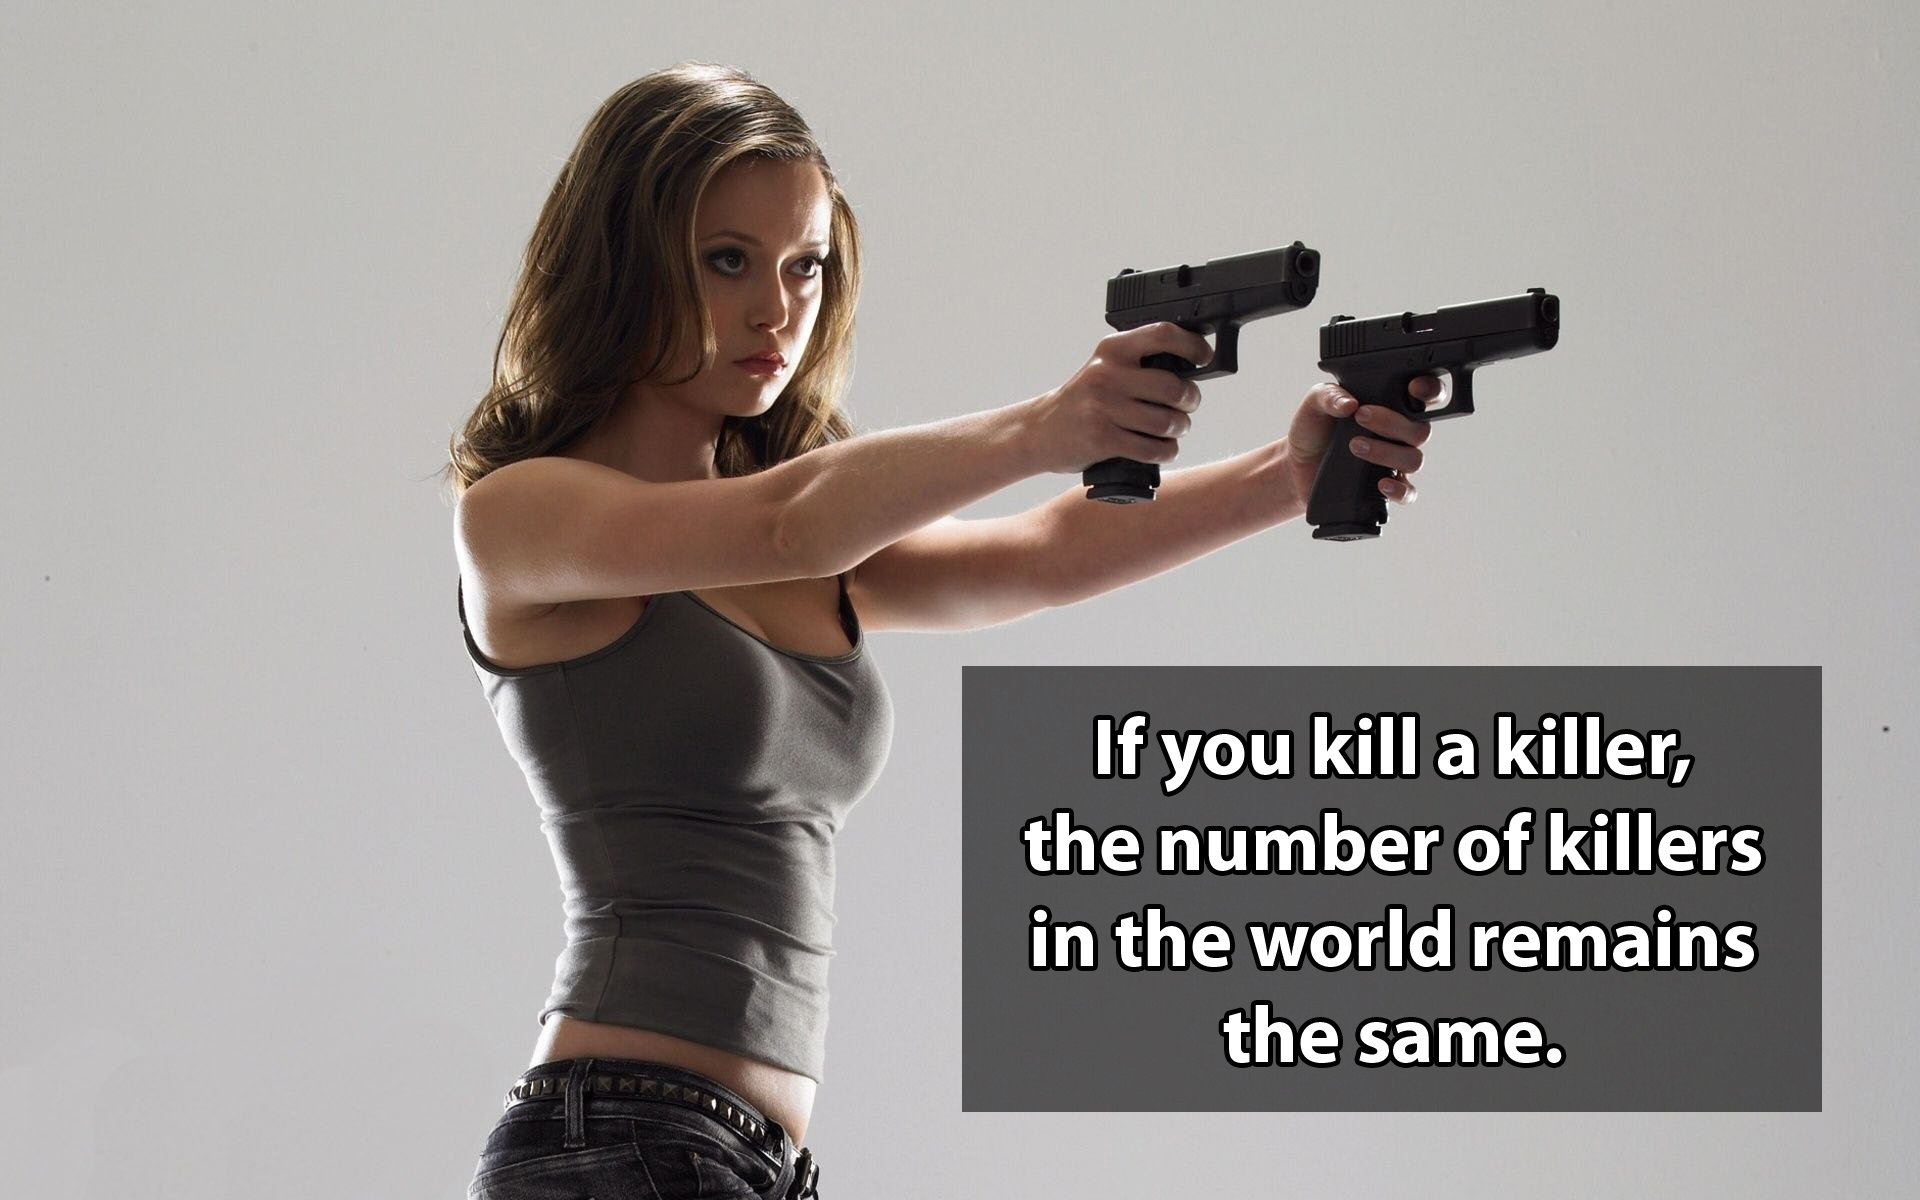 shower thought girls with guns - If you kill a killer, the number of killers in the world remains the same.